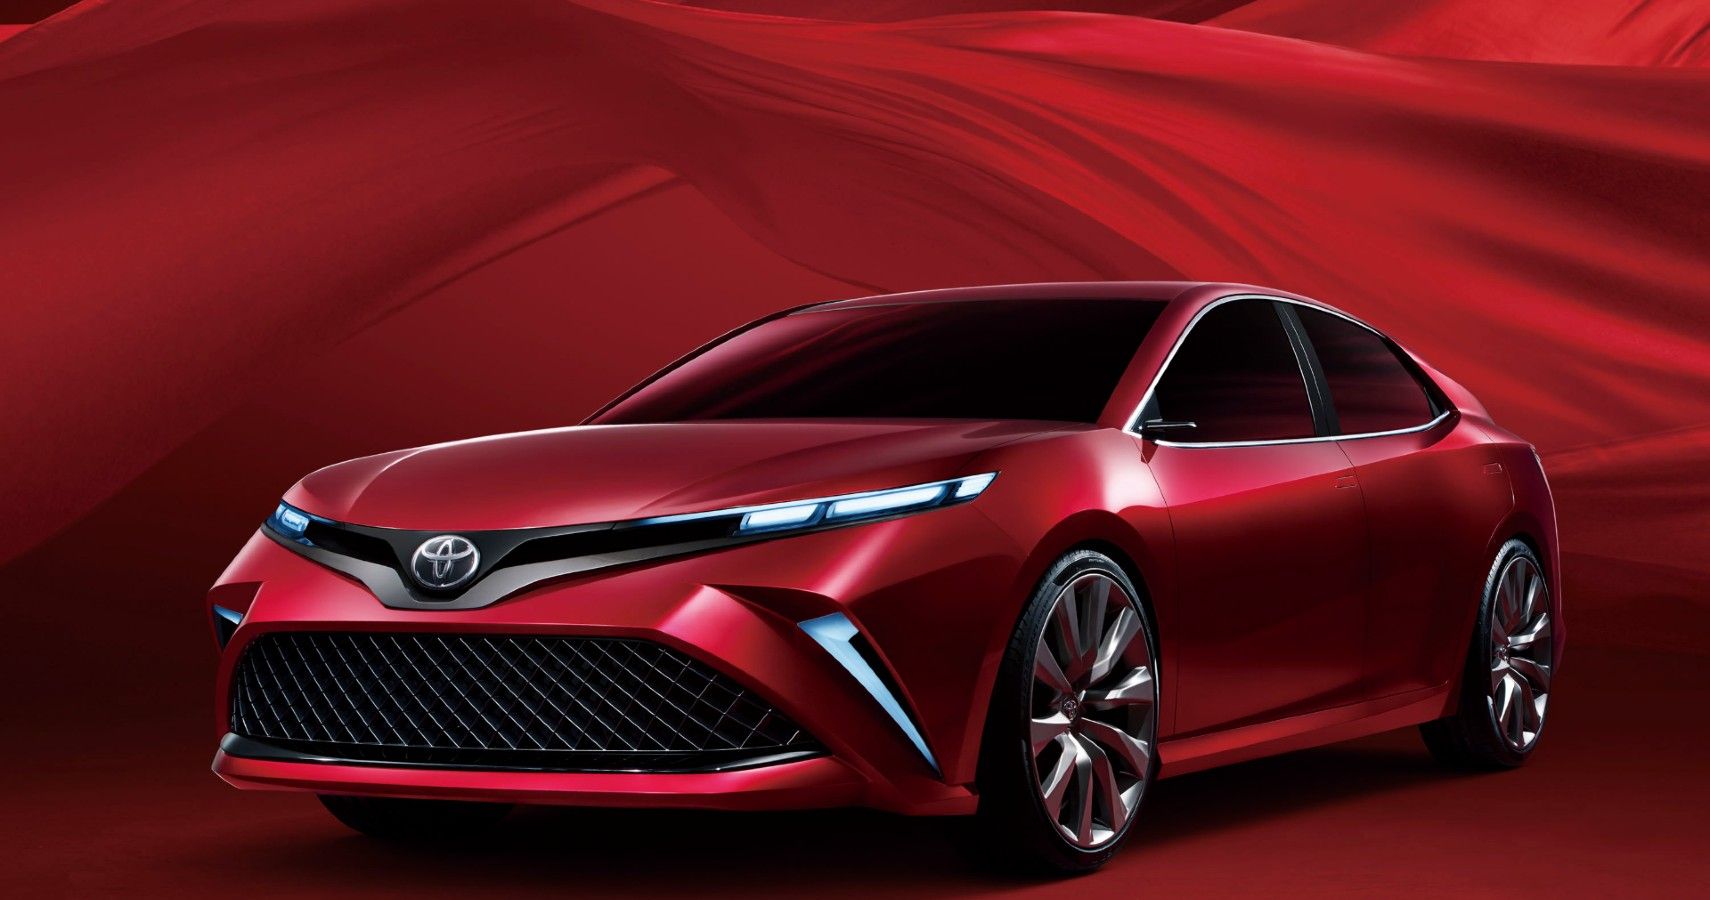 Toyota's Future Models And Specs Leaked Via Instagram